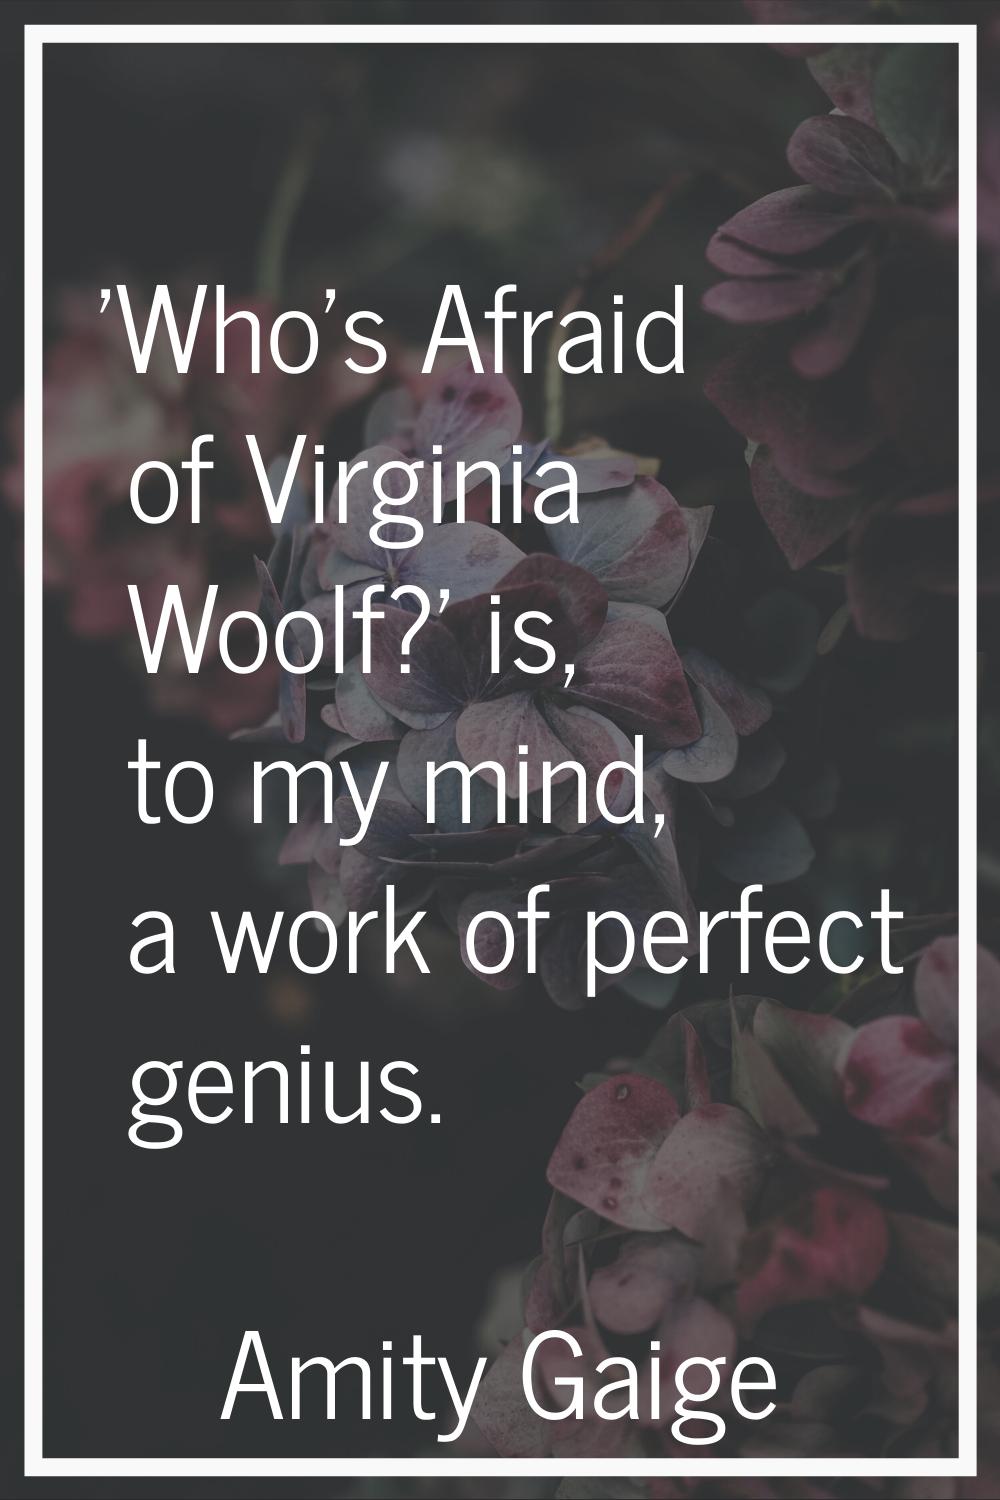 'Who's Afraid of Virginia Woolf?' is, to my mind, a work of perfect genius.